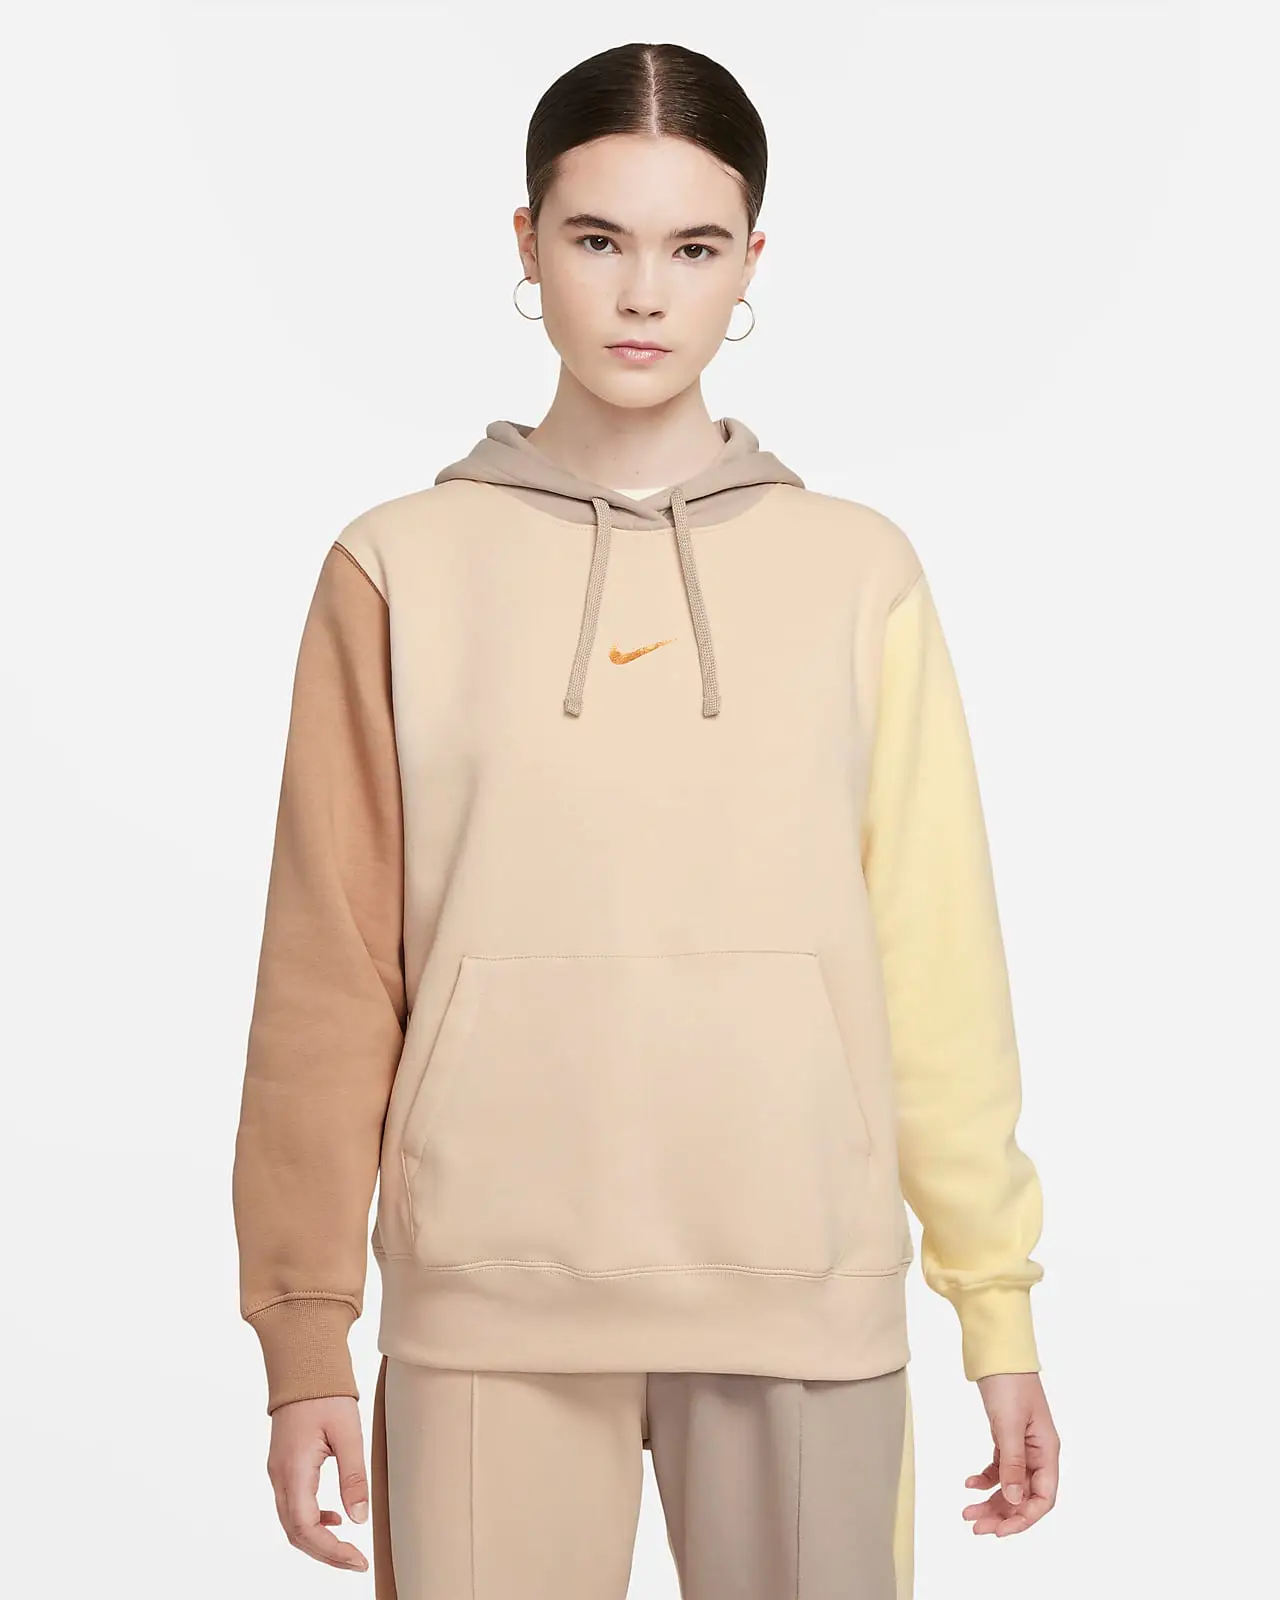 Nike's New Neutral-Hued Co-ord is This Season's Wardrobe Staple | The ...